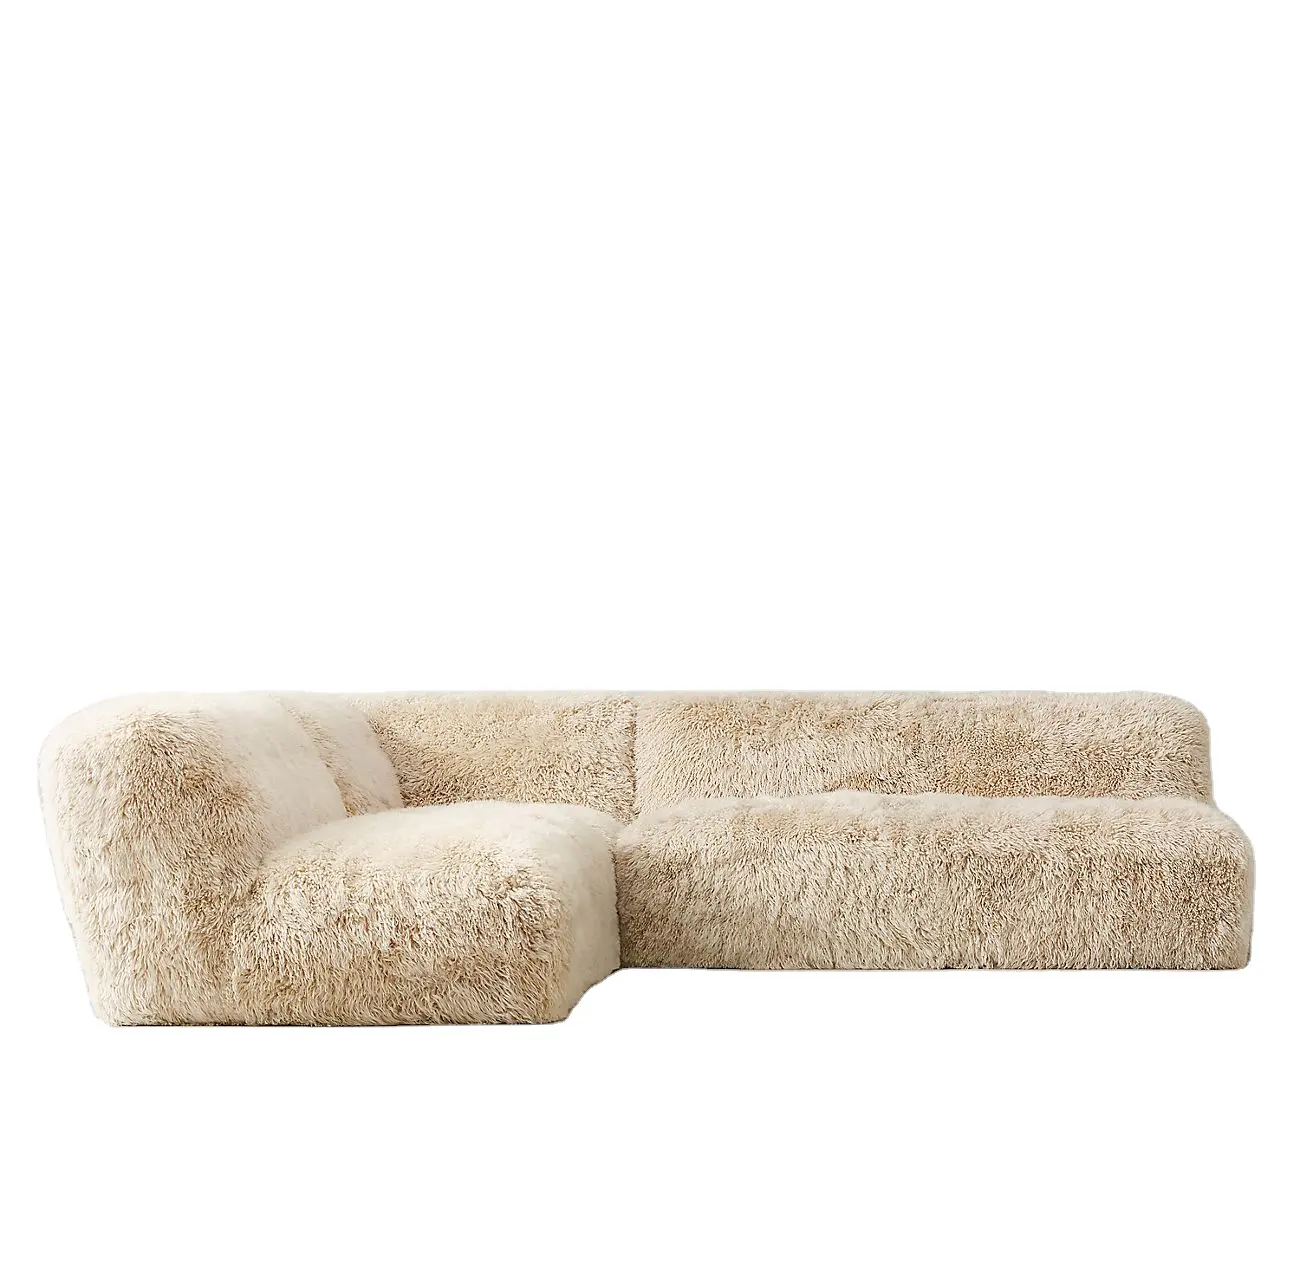 Modern living furniture fabric sofa home furniture sofa set wrapped in luxe, long-haired sheepskin L-sectional sofa